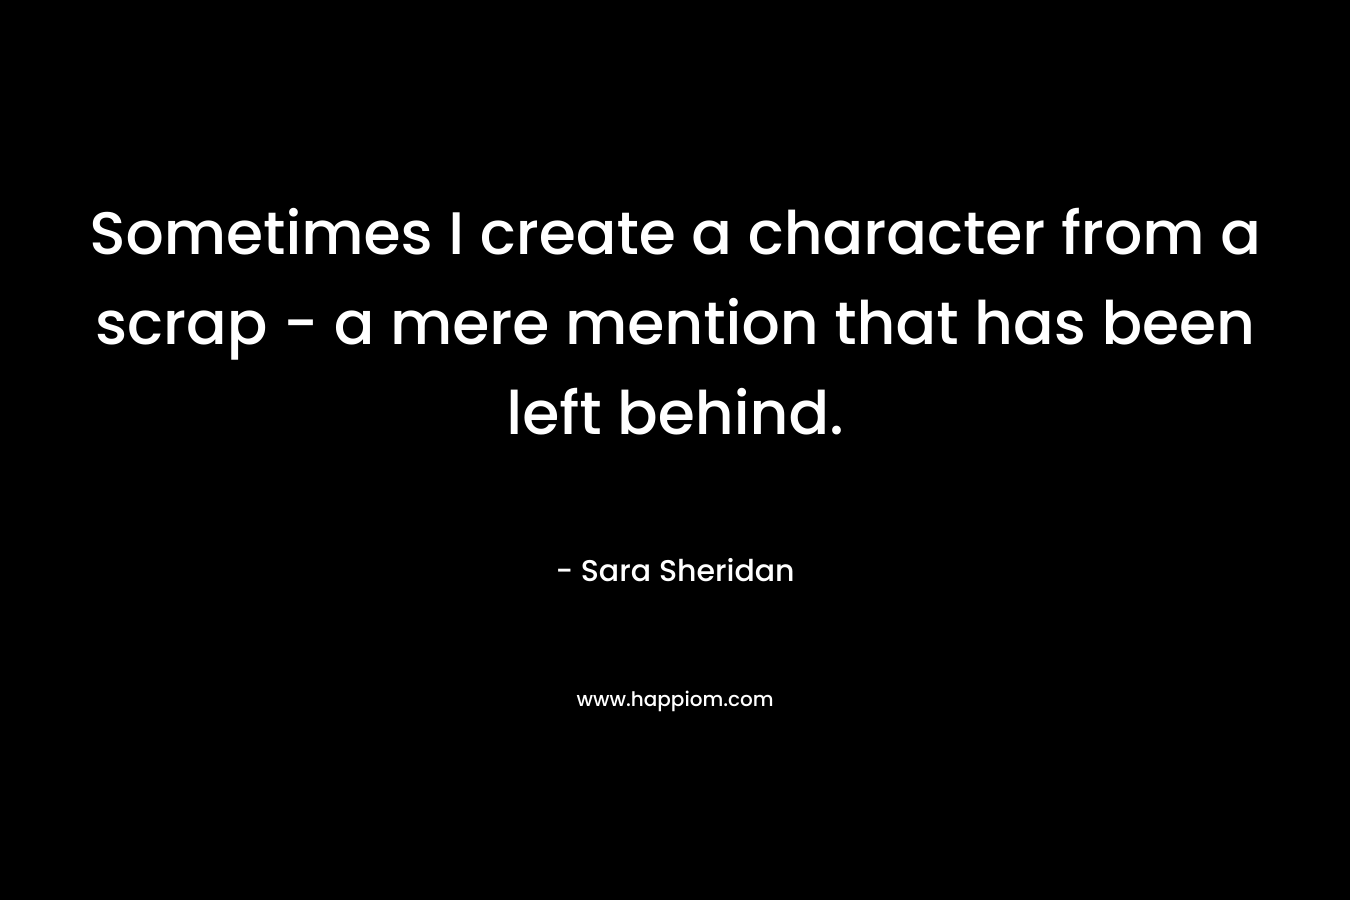 Sometimes I create a character from a scrap – a mere mention that has been left behind. – Sara Sheridan